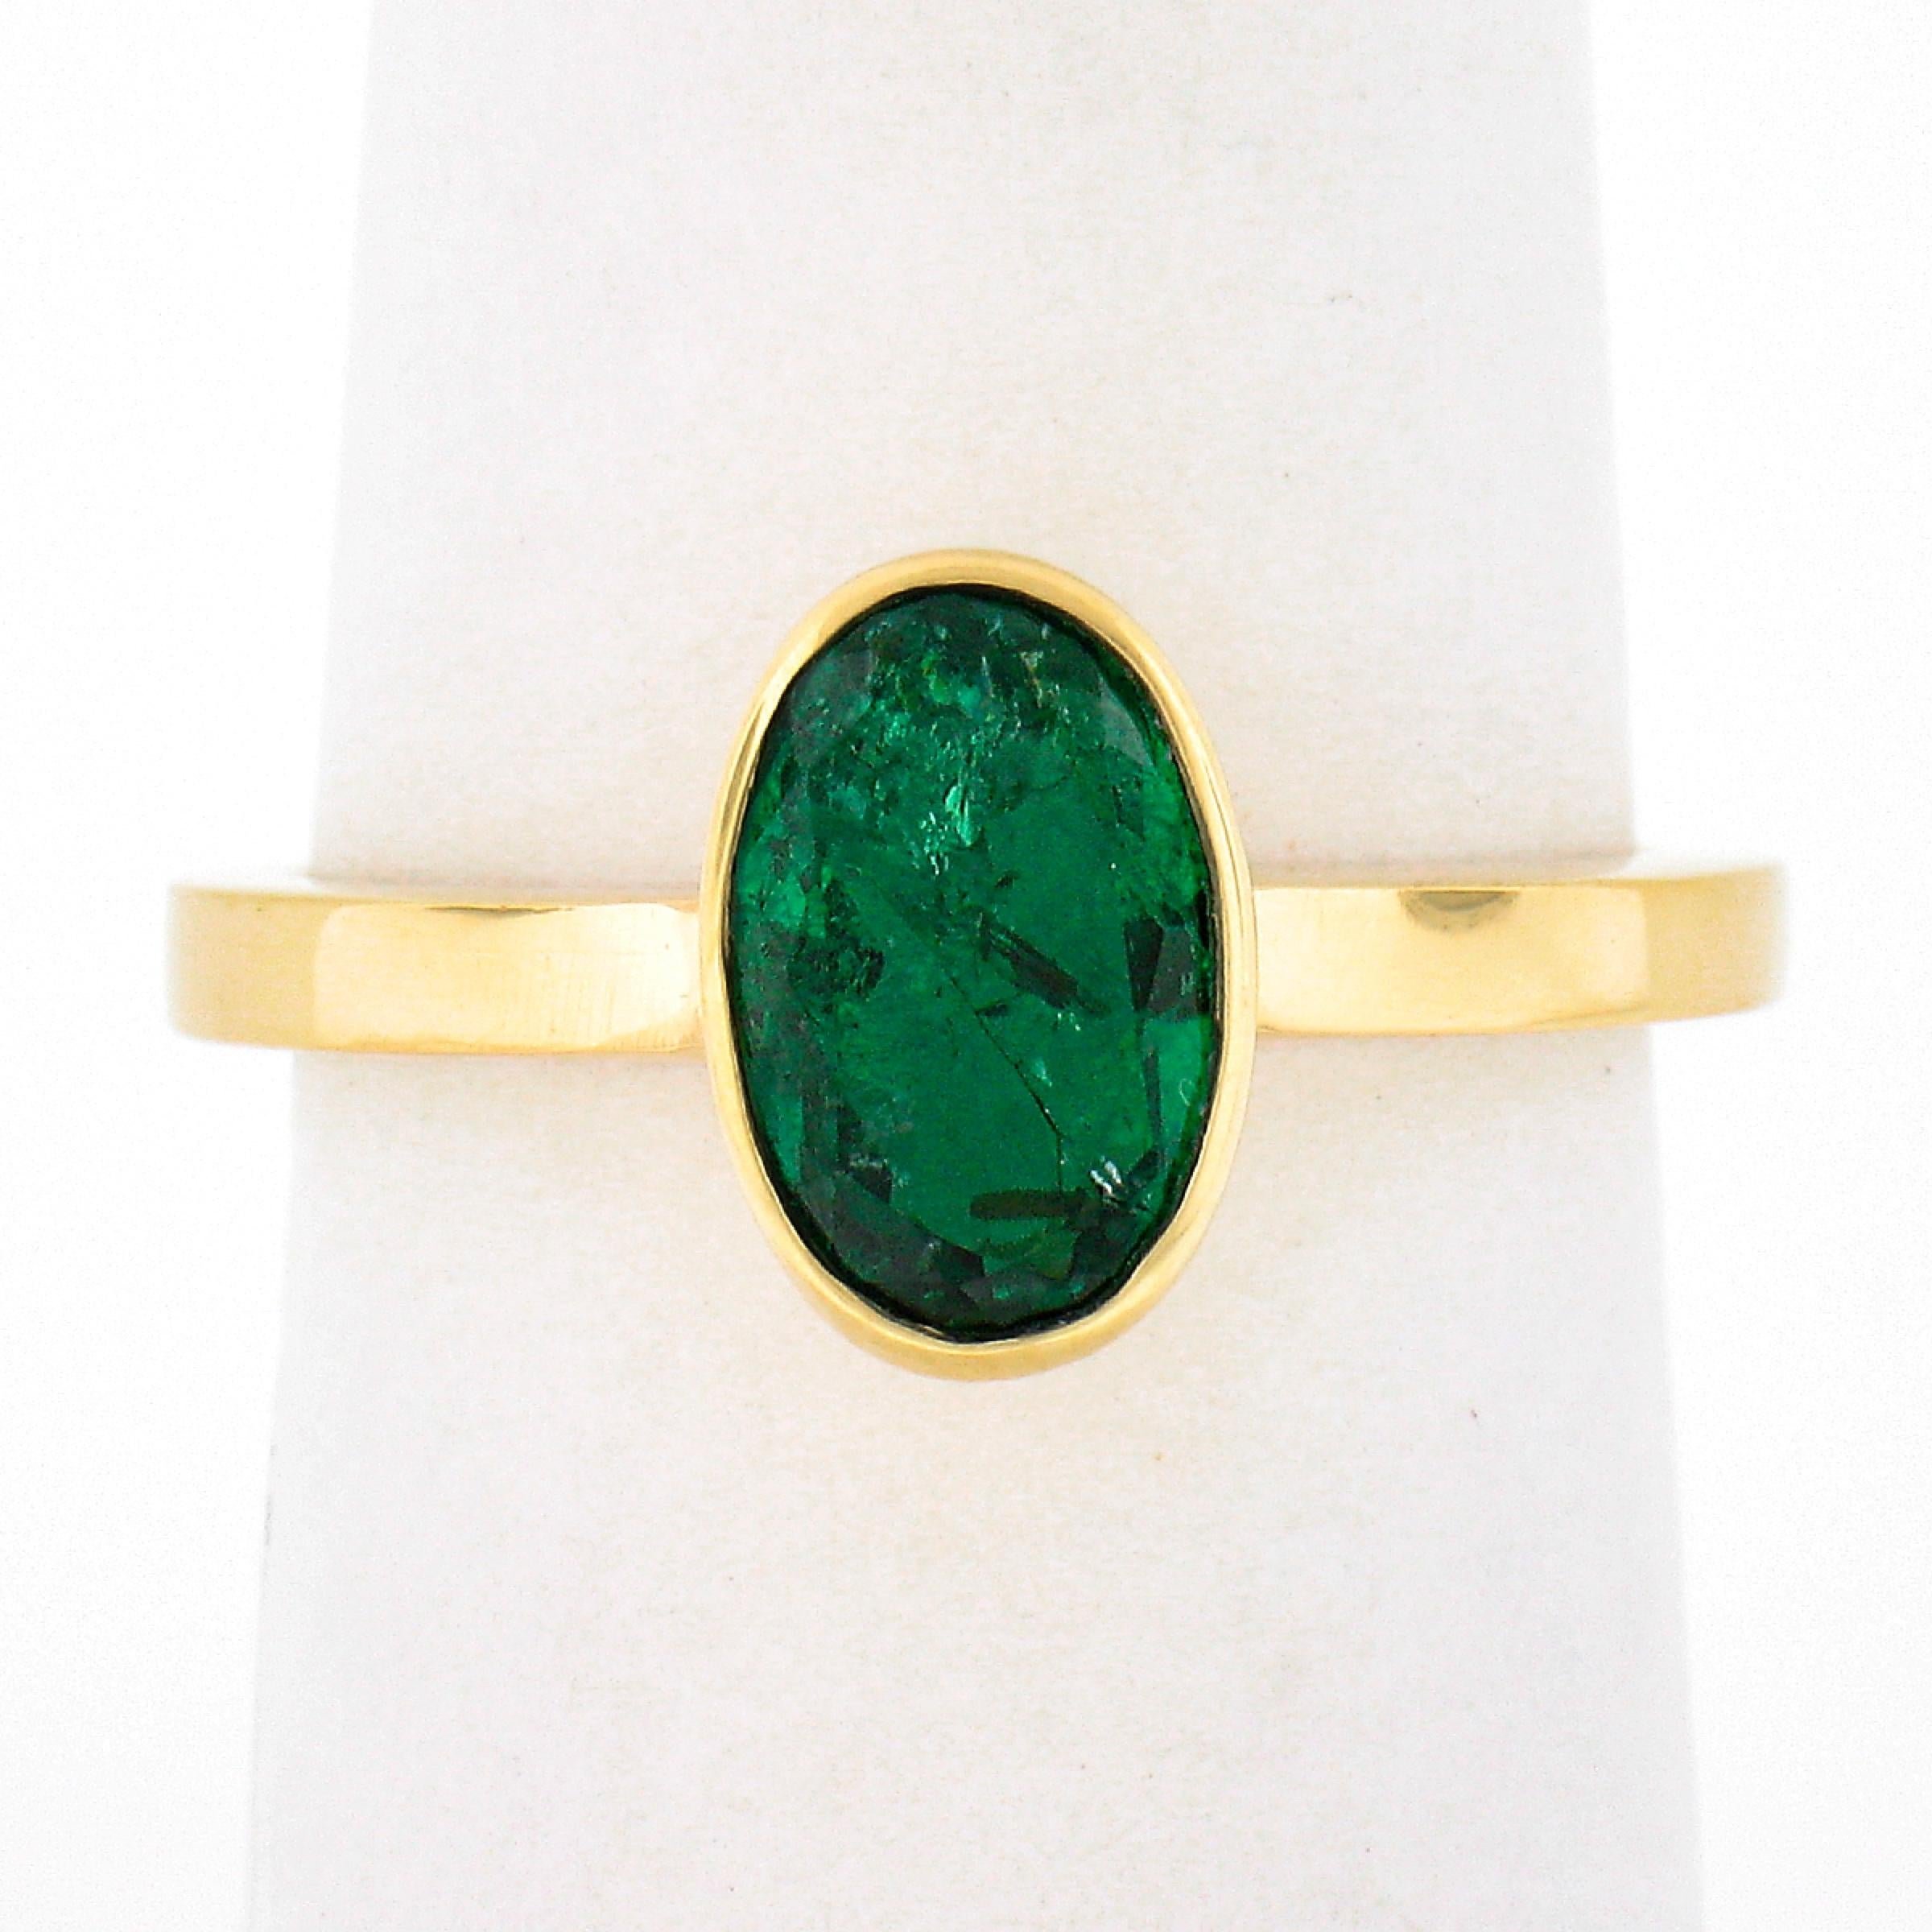 This beautiful emerald solitaire ring is crafted in solid 18k yellow gold and features a genuine emerald neatly bezel set at the center. This oval cut solitaire has a gorgeous, rich, dark green color with very nice shine due to its brilliant cutting